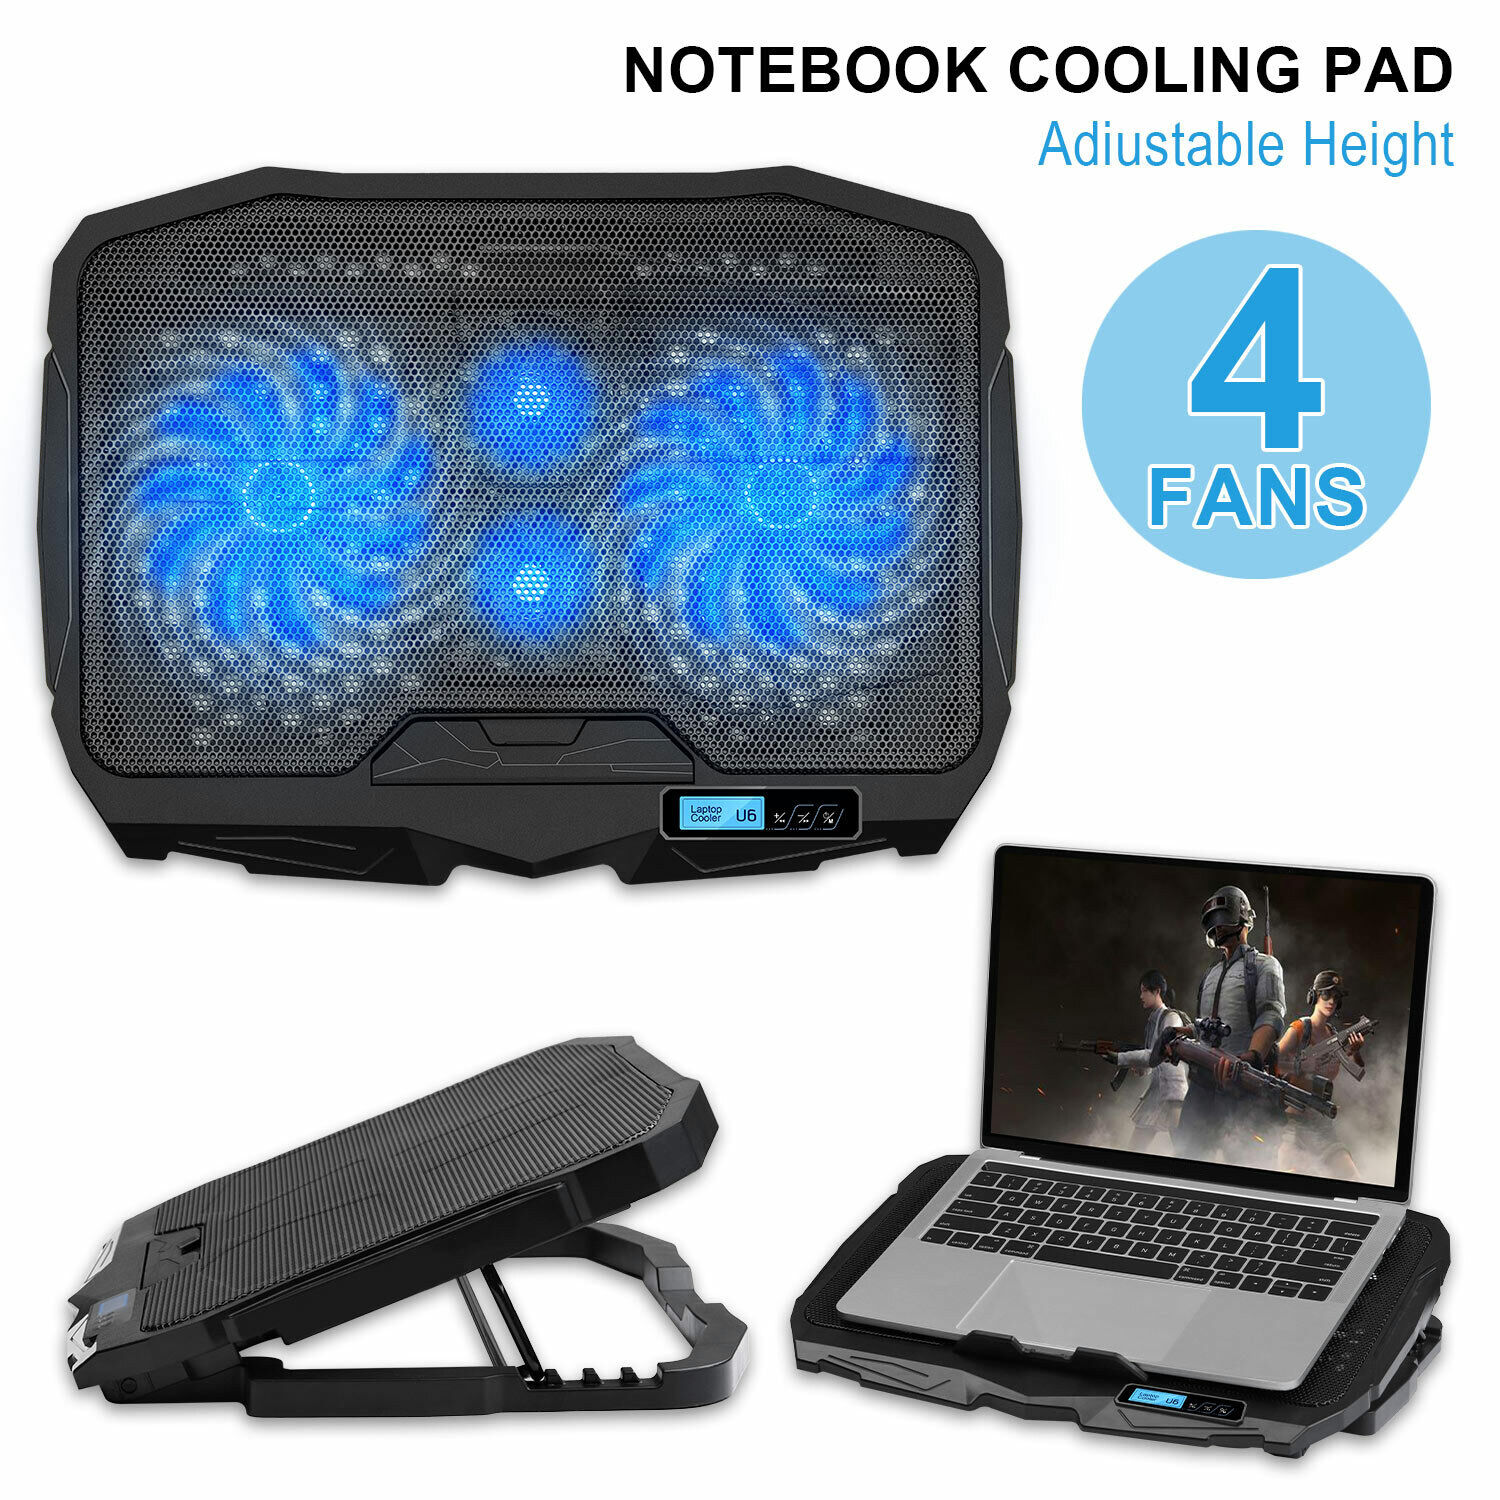 Wind Laptop Cooling Pad LED Display - 4 Blue LED Fans Light Quiet Rapid Cooler YELLOW-PRICE YP-LCP-45 - фотография #8